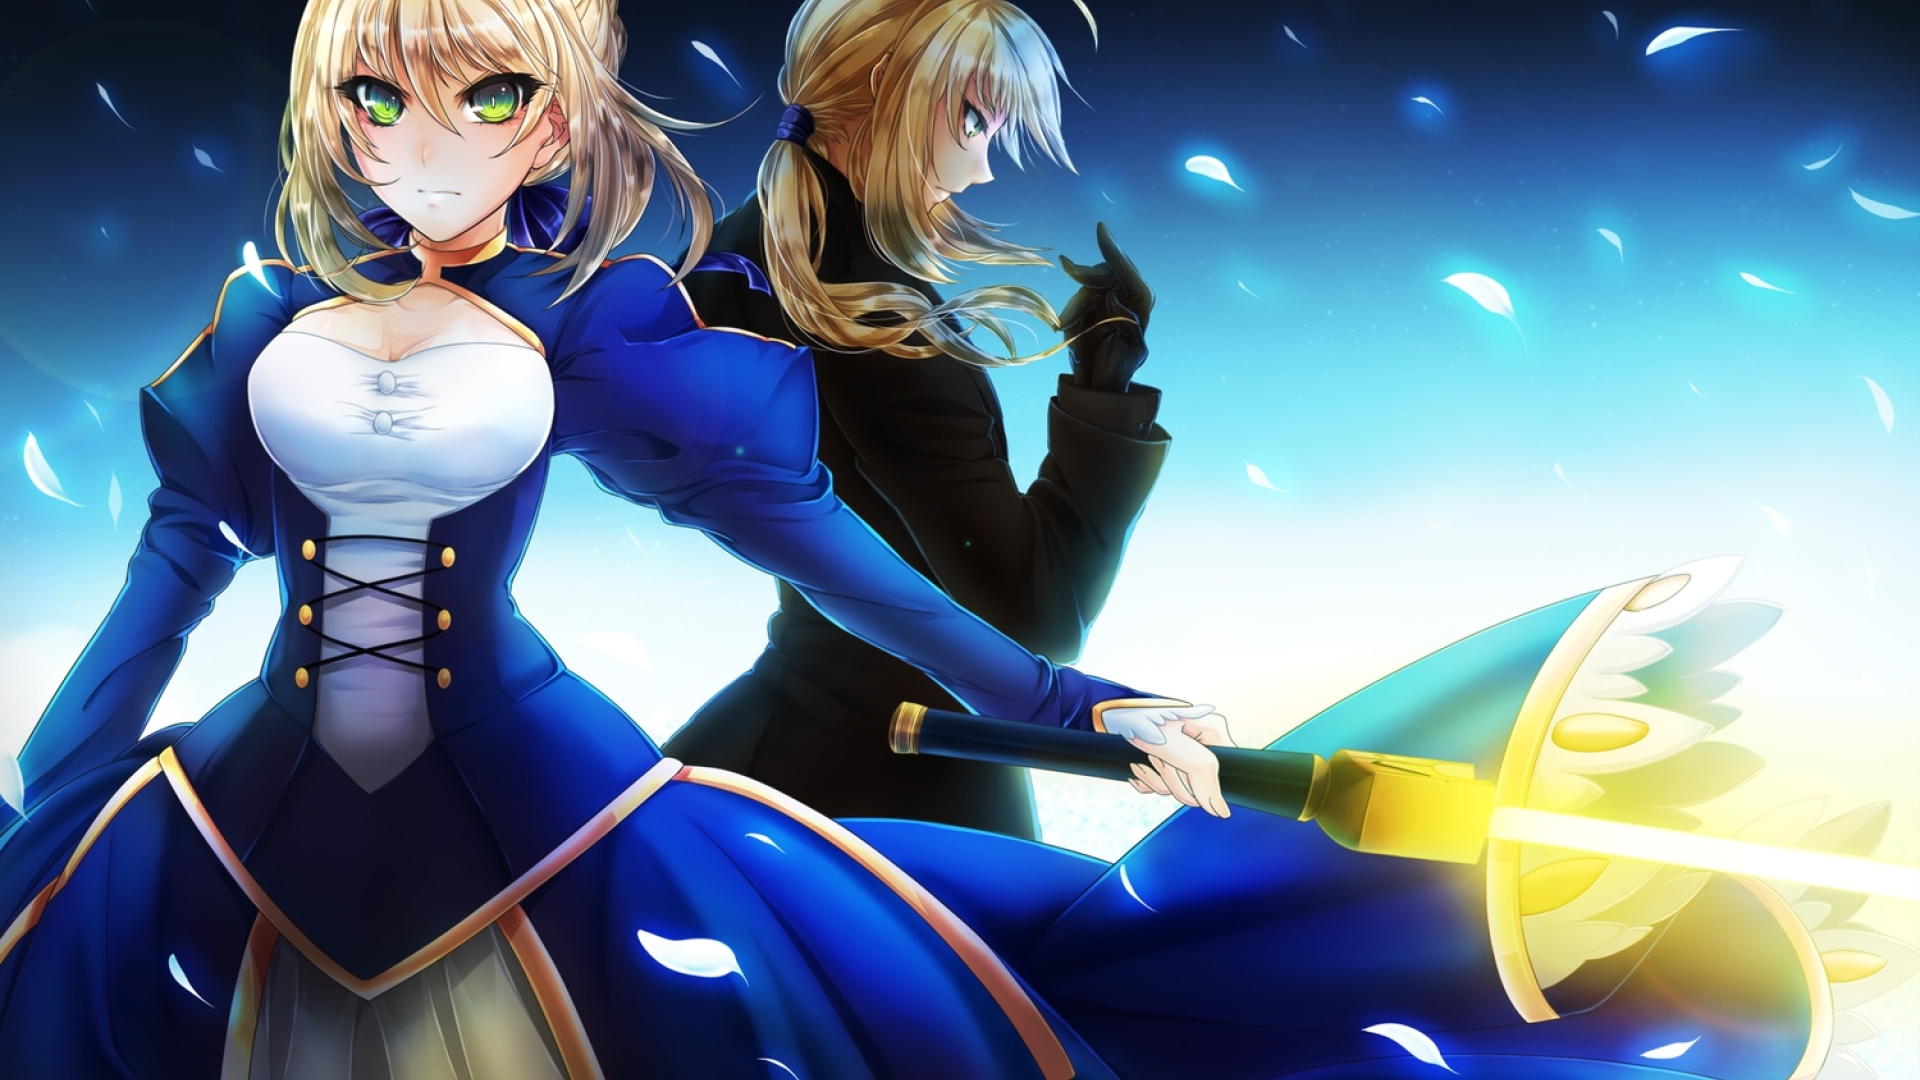 19x1080 Fate Stay Night Fate Zero Saber Girl 1080p Laptop Full Hd Wallpaper Hd Anime 4k Wallpapers Images Photos And Background Wallpapers Den